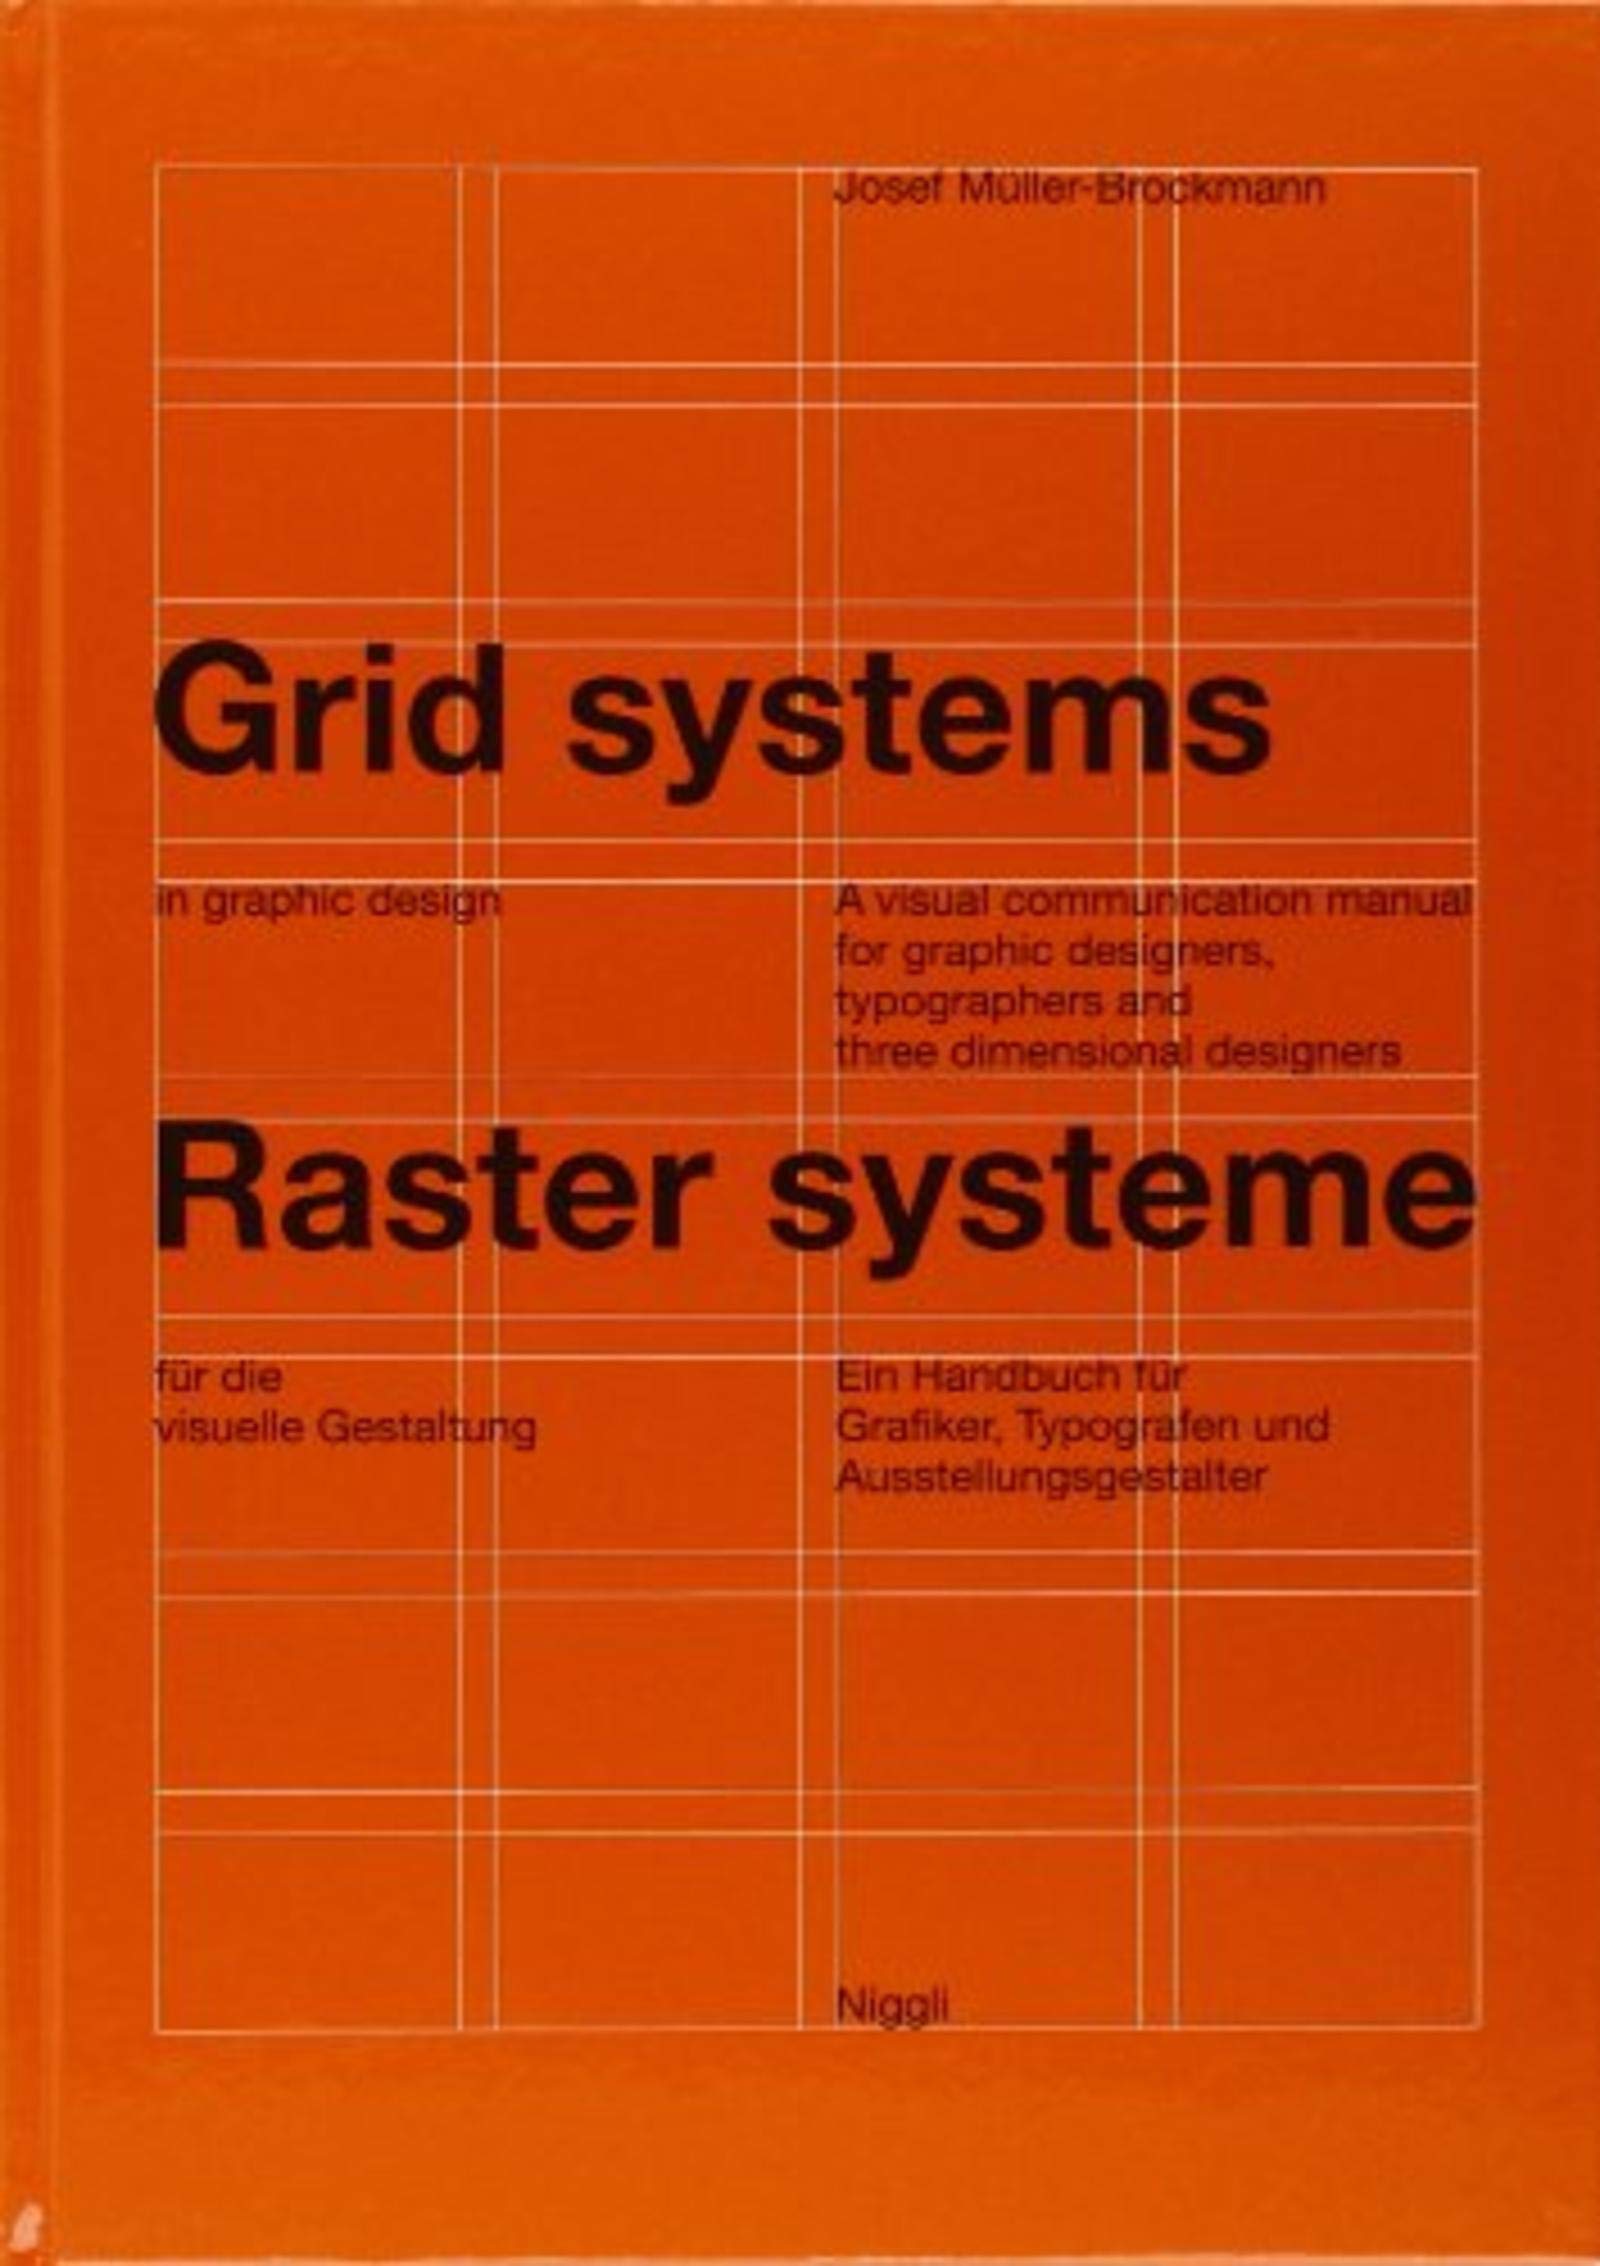 Grid Systems in Graphic Design by Josef Muller Brockmann